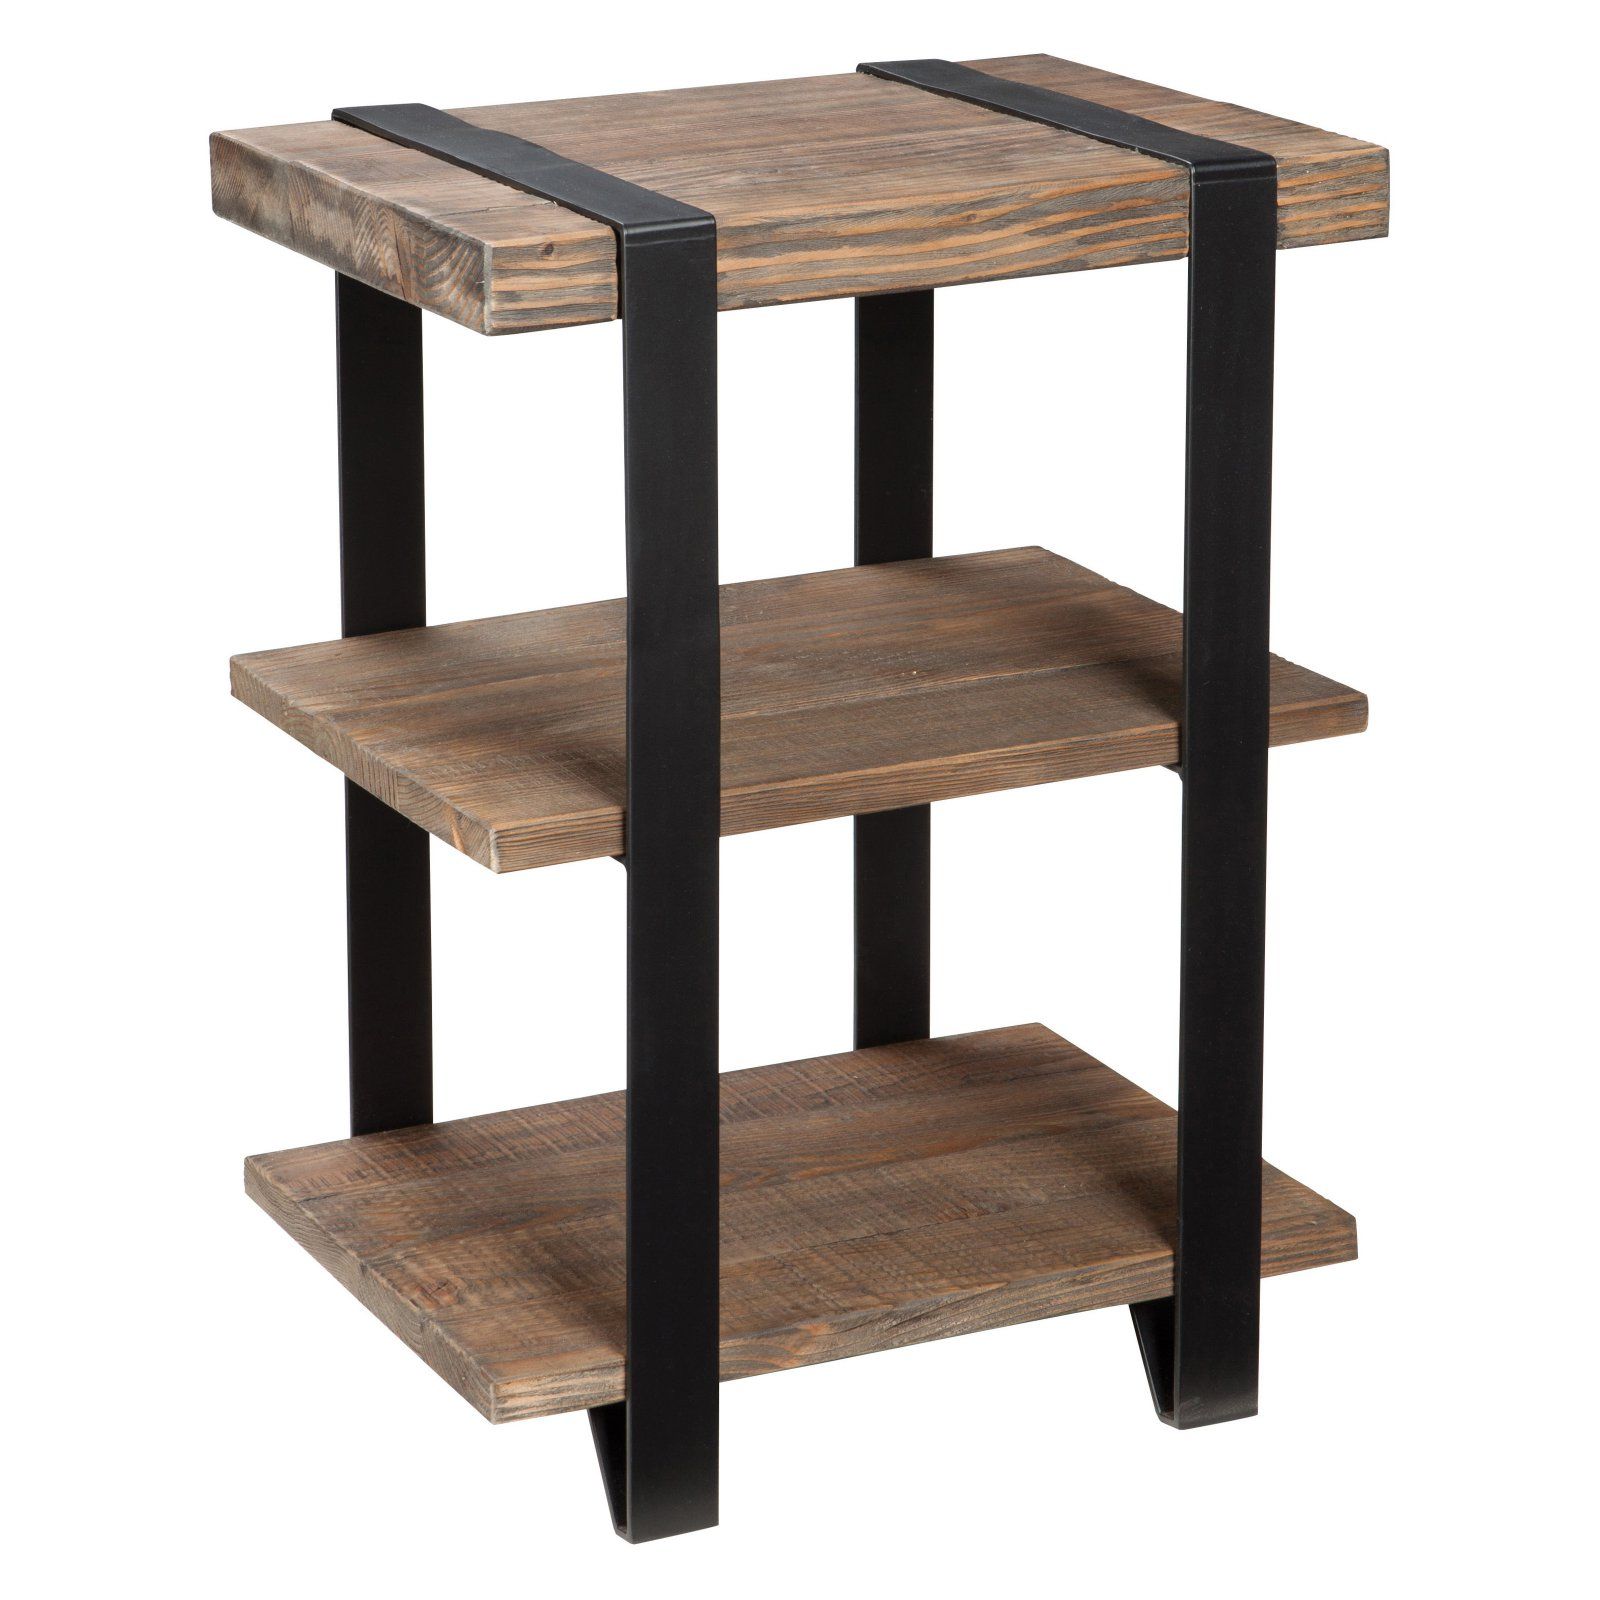 Modesto 2 Shelf Metal Strap And Reclaimed Wood End Table, Rustic Pertaining To Natural Wood And Black 2 Shelf Desks (View 8 of 15)